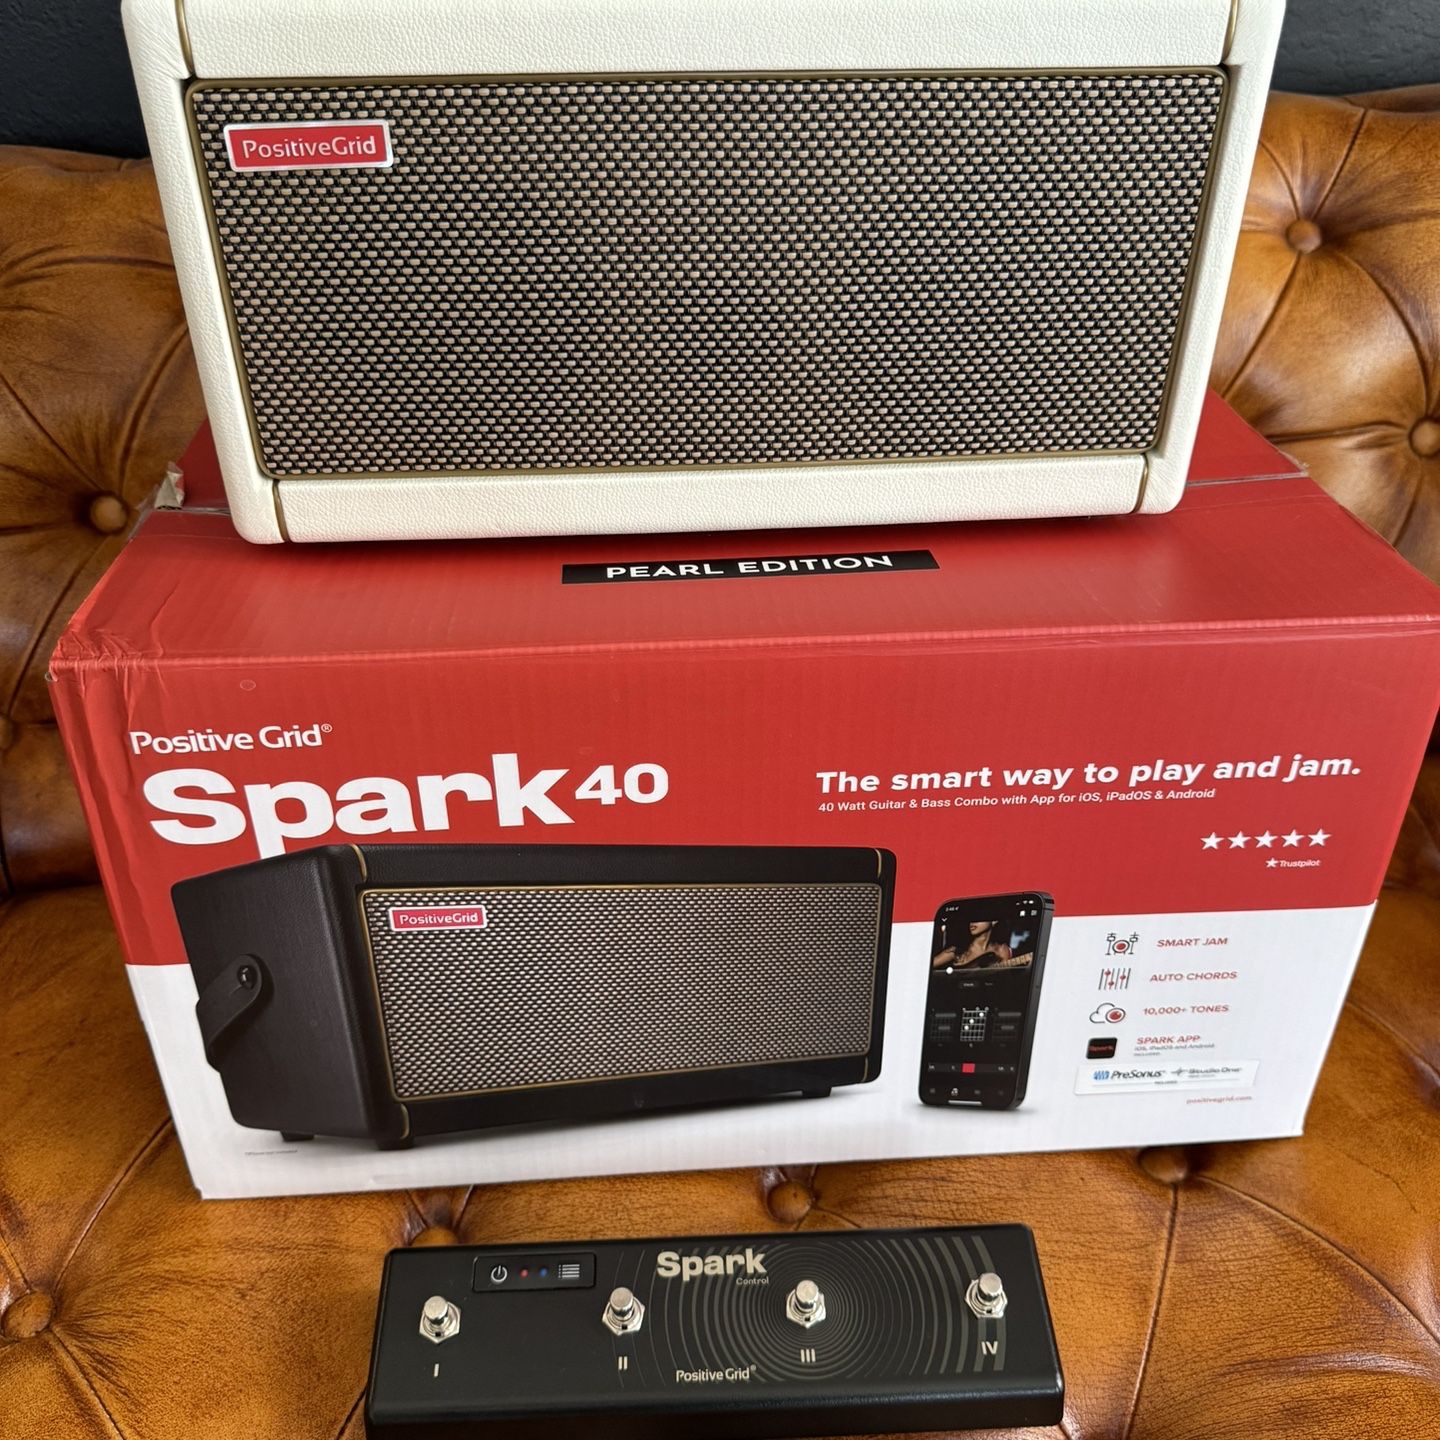 Spark 40(Pearl Edition) Guitar Amp & Spark Control Wireless Foot Switch